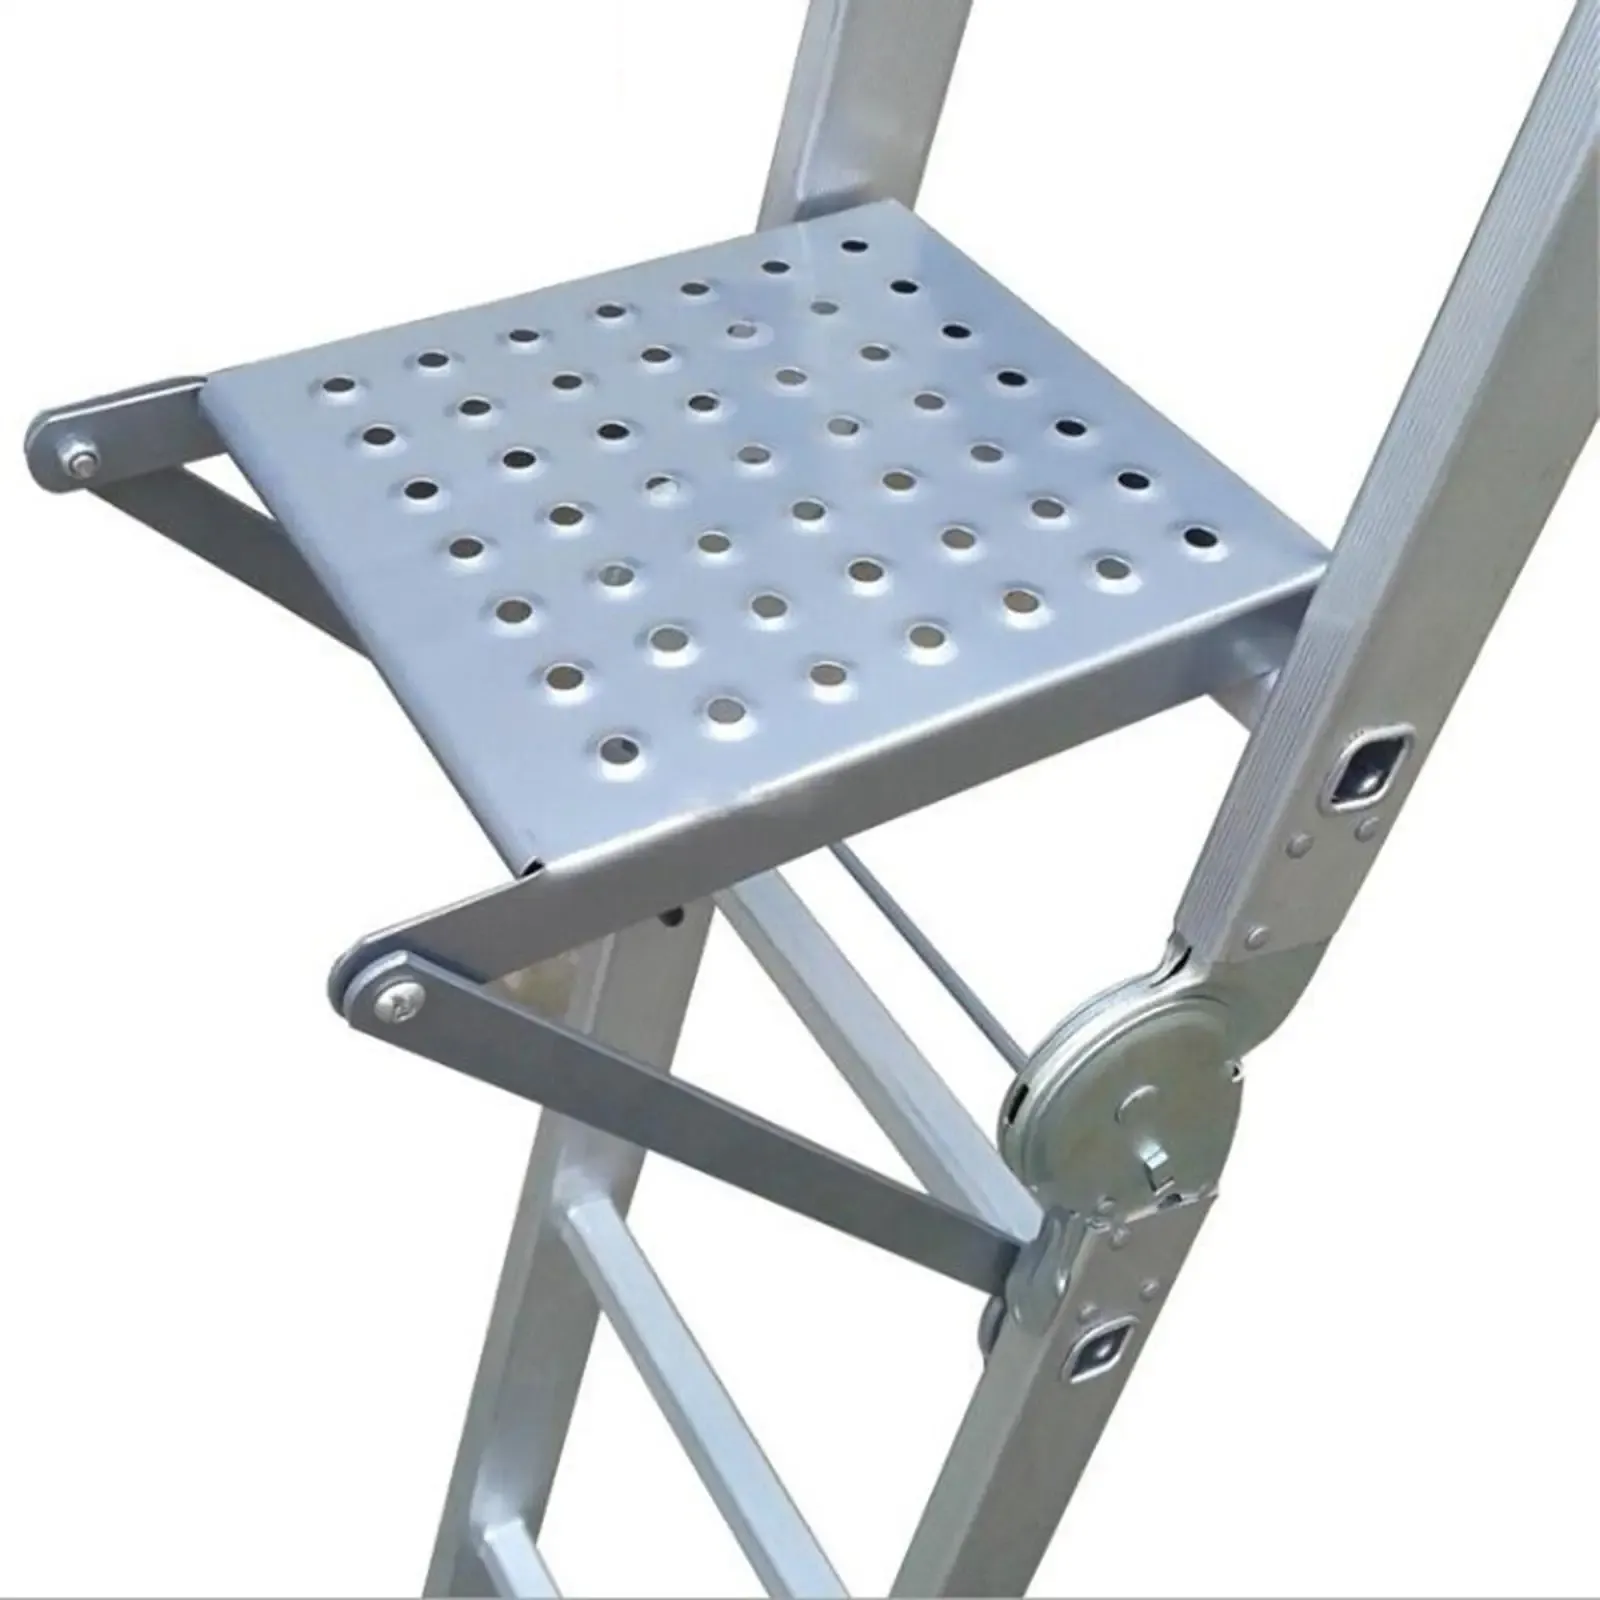 Ladders Ladder Work Platform Ladder Work Stand Extension Ladders Sturdy Heavy Duty Equipment Stable for Kitchen Home Painters Tools Hold